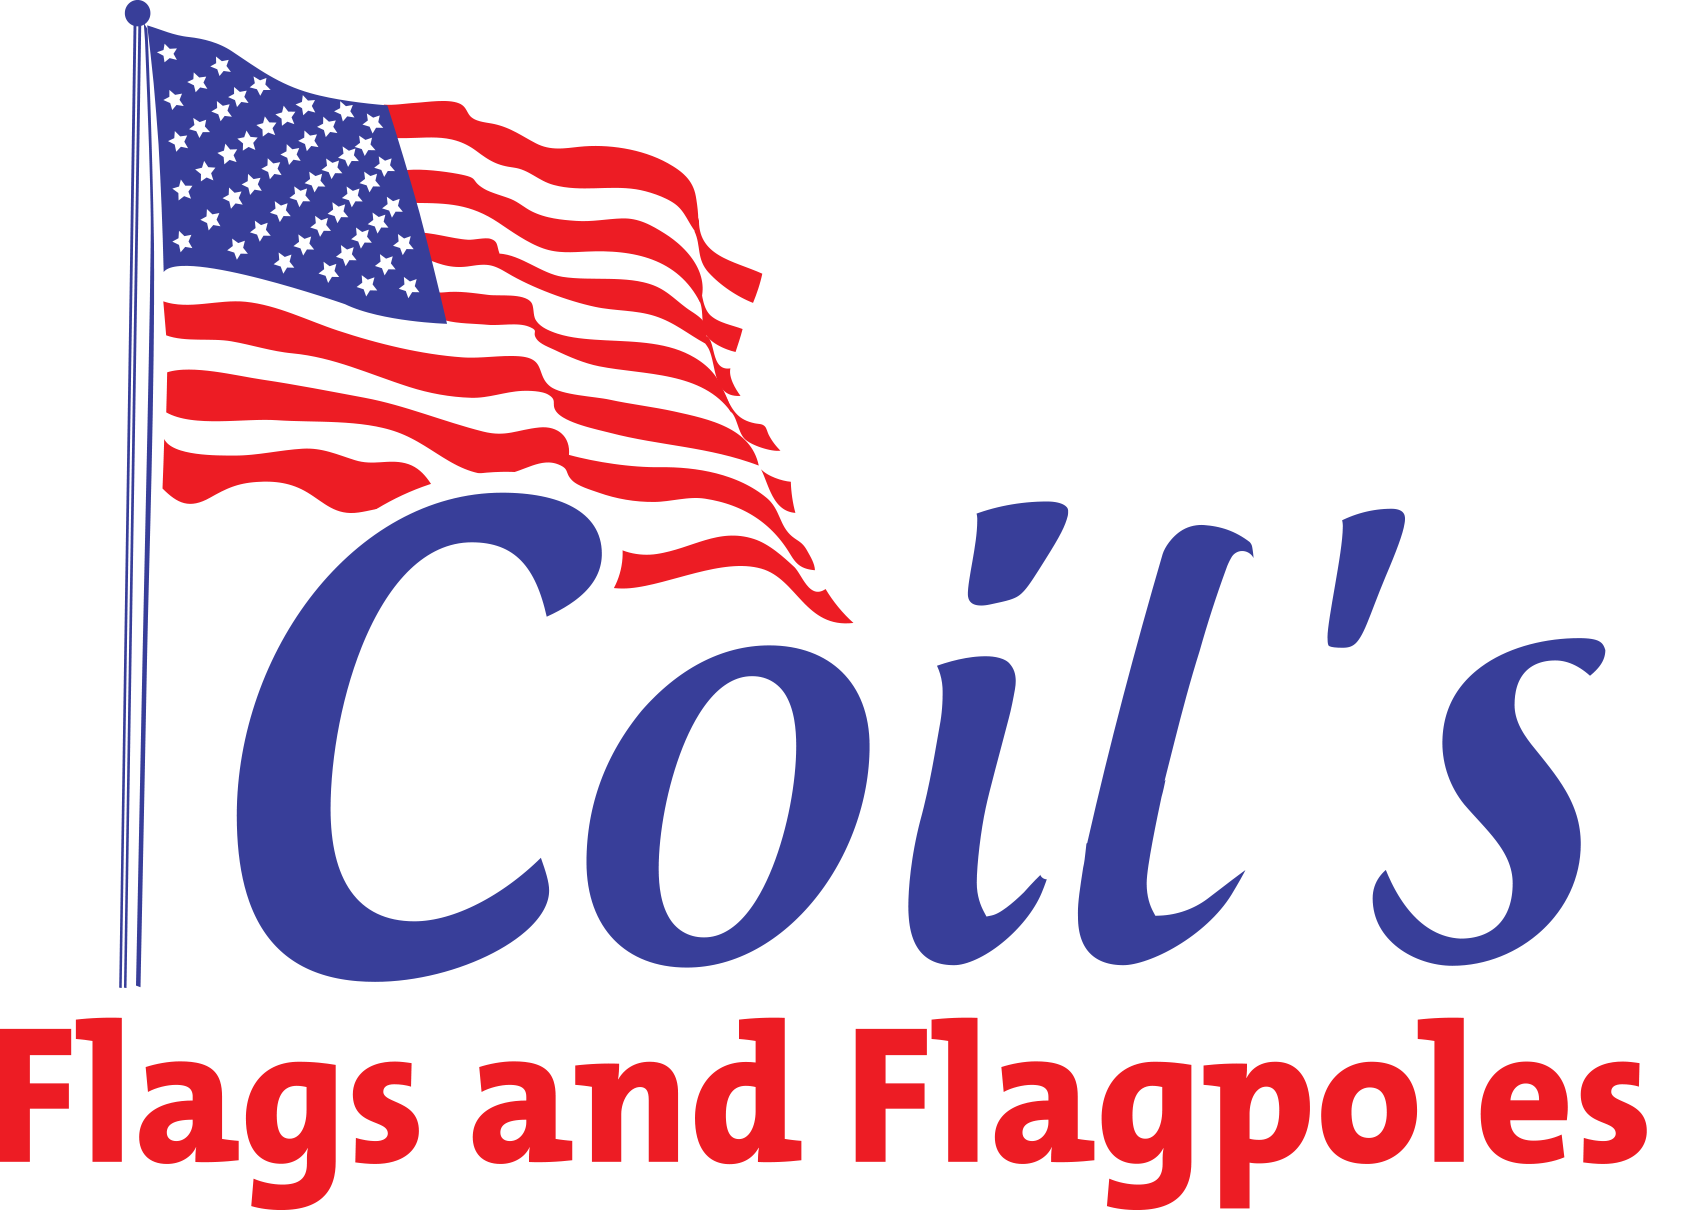 Coil's Flags and Flagpoles